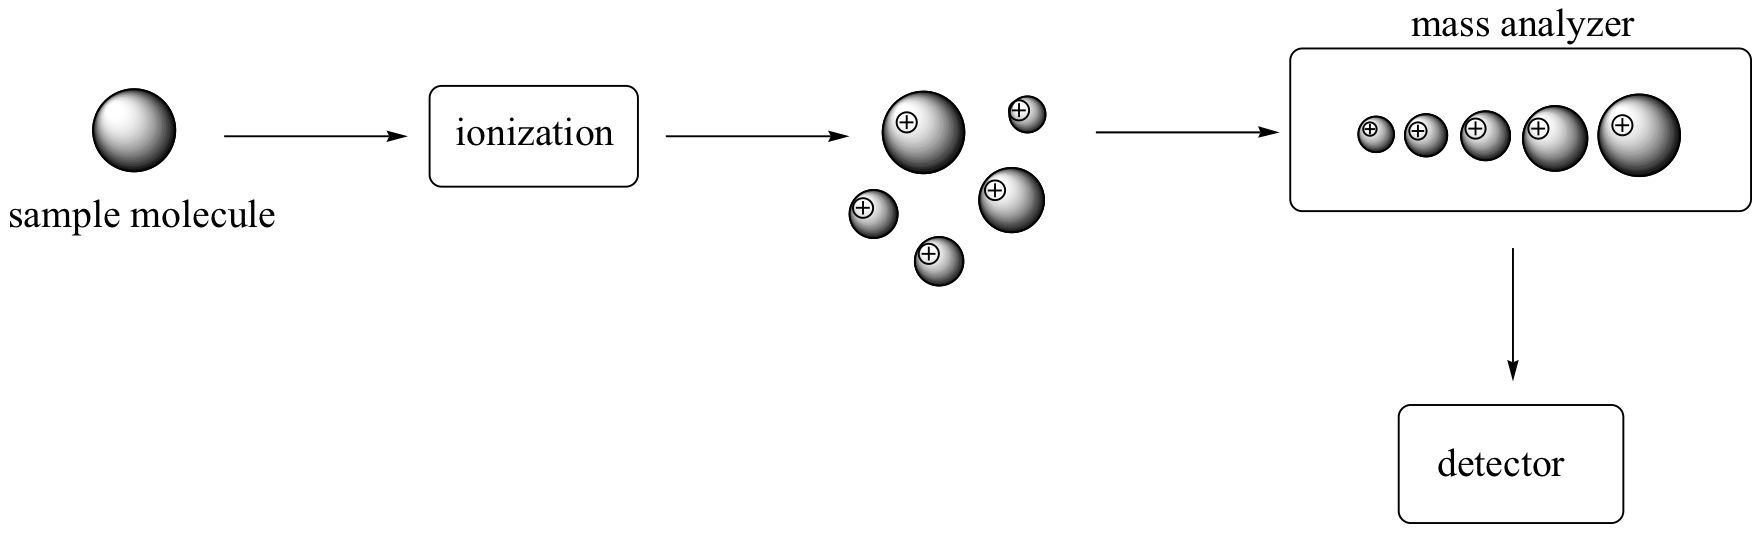 Sample molecule represented as a ball. Arrow pointing from molecule to ionization. Arrow from ionization to five balls with positive charges. Arrow from balls to mass analyzer with the balls in a line in size order. Lastly, an arrow going to detector.